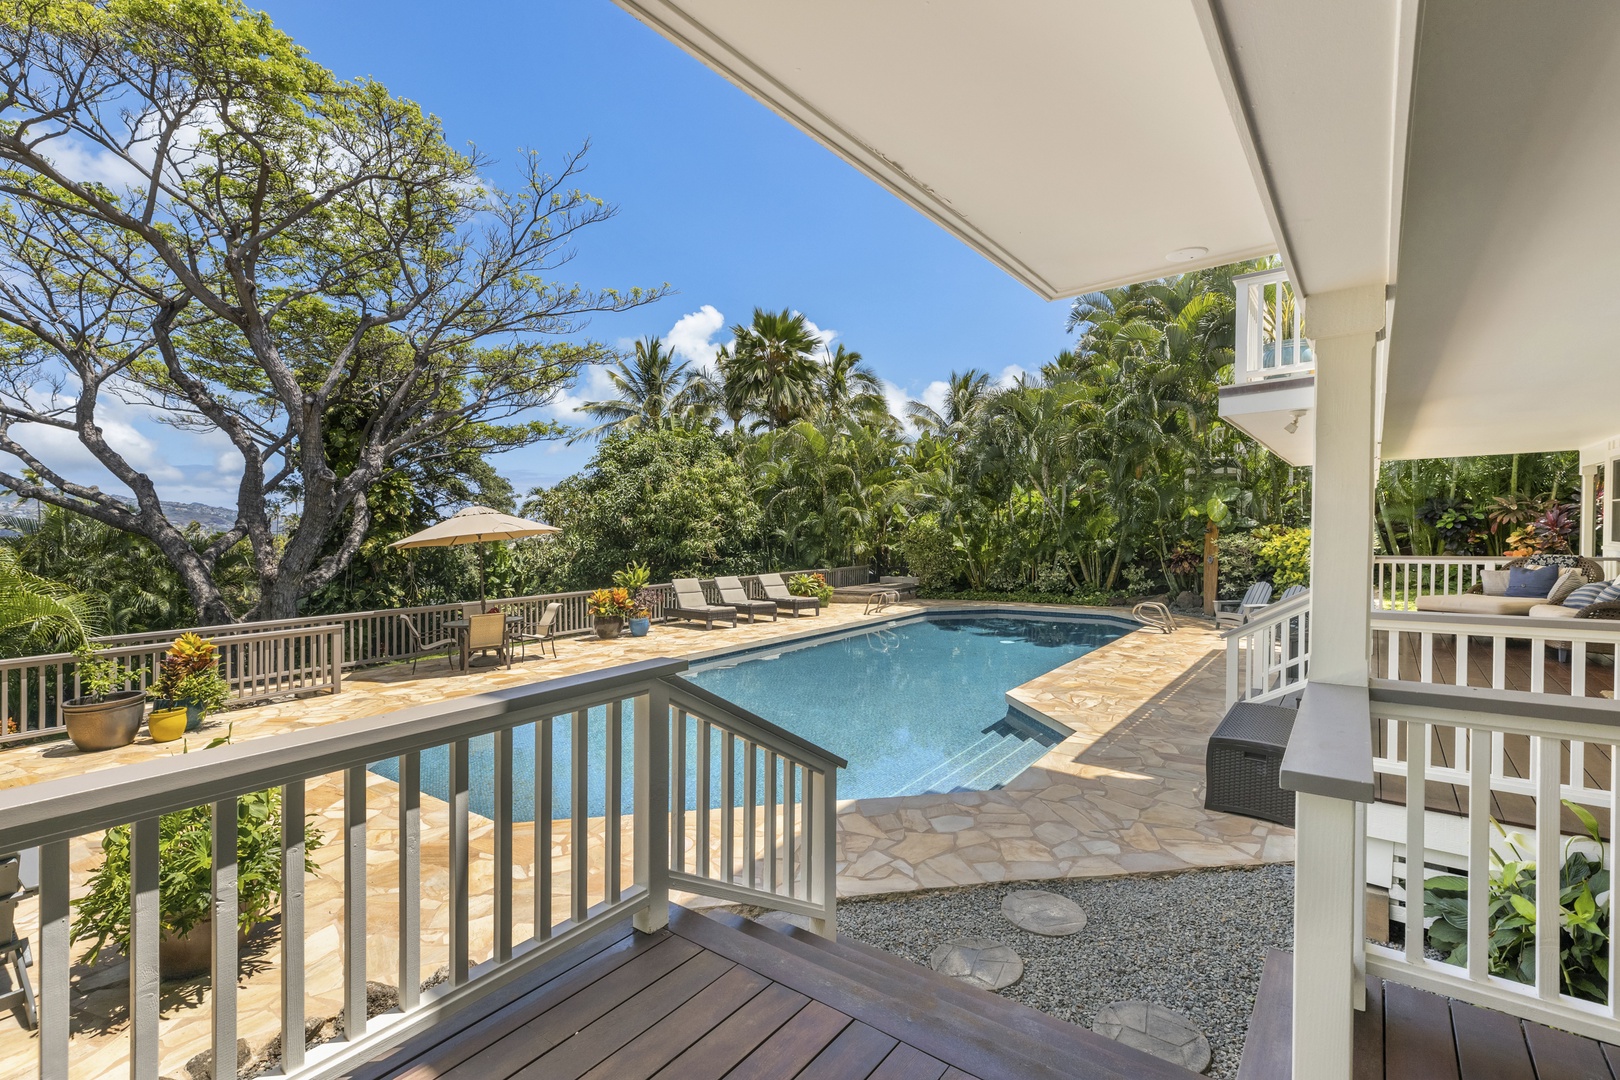 Honolulu Vacation Rentals, Hale Le'ahi* - Step into paradise at the pool area